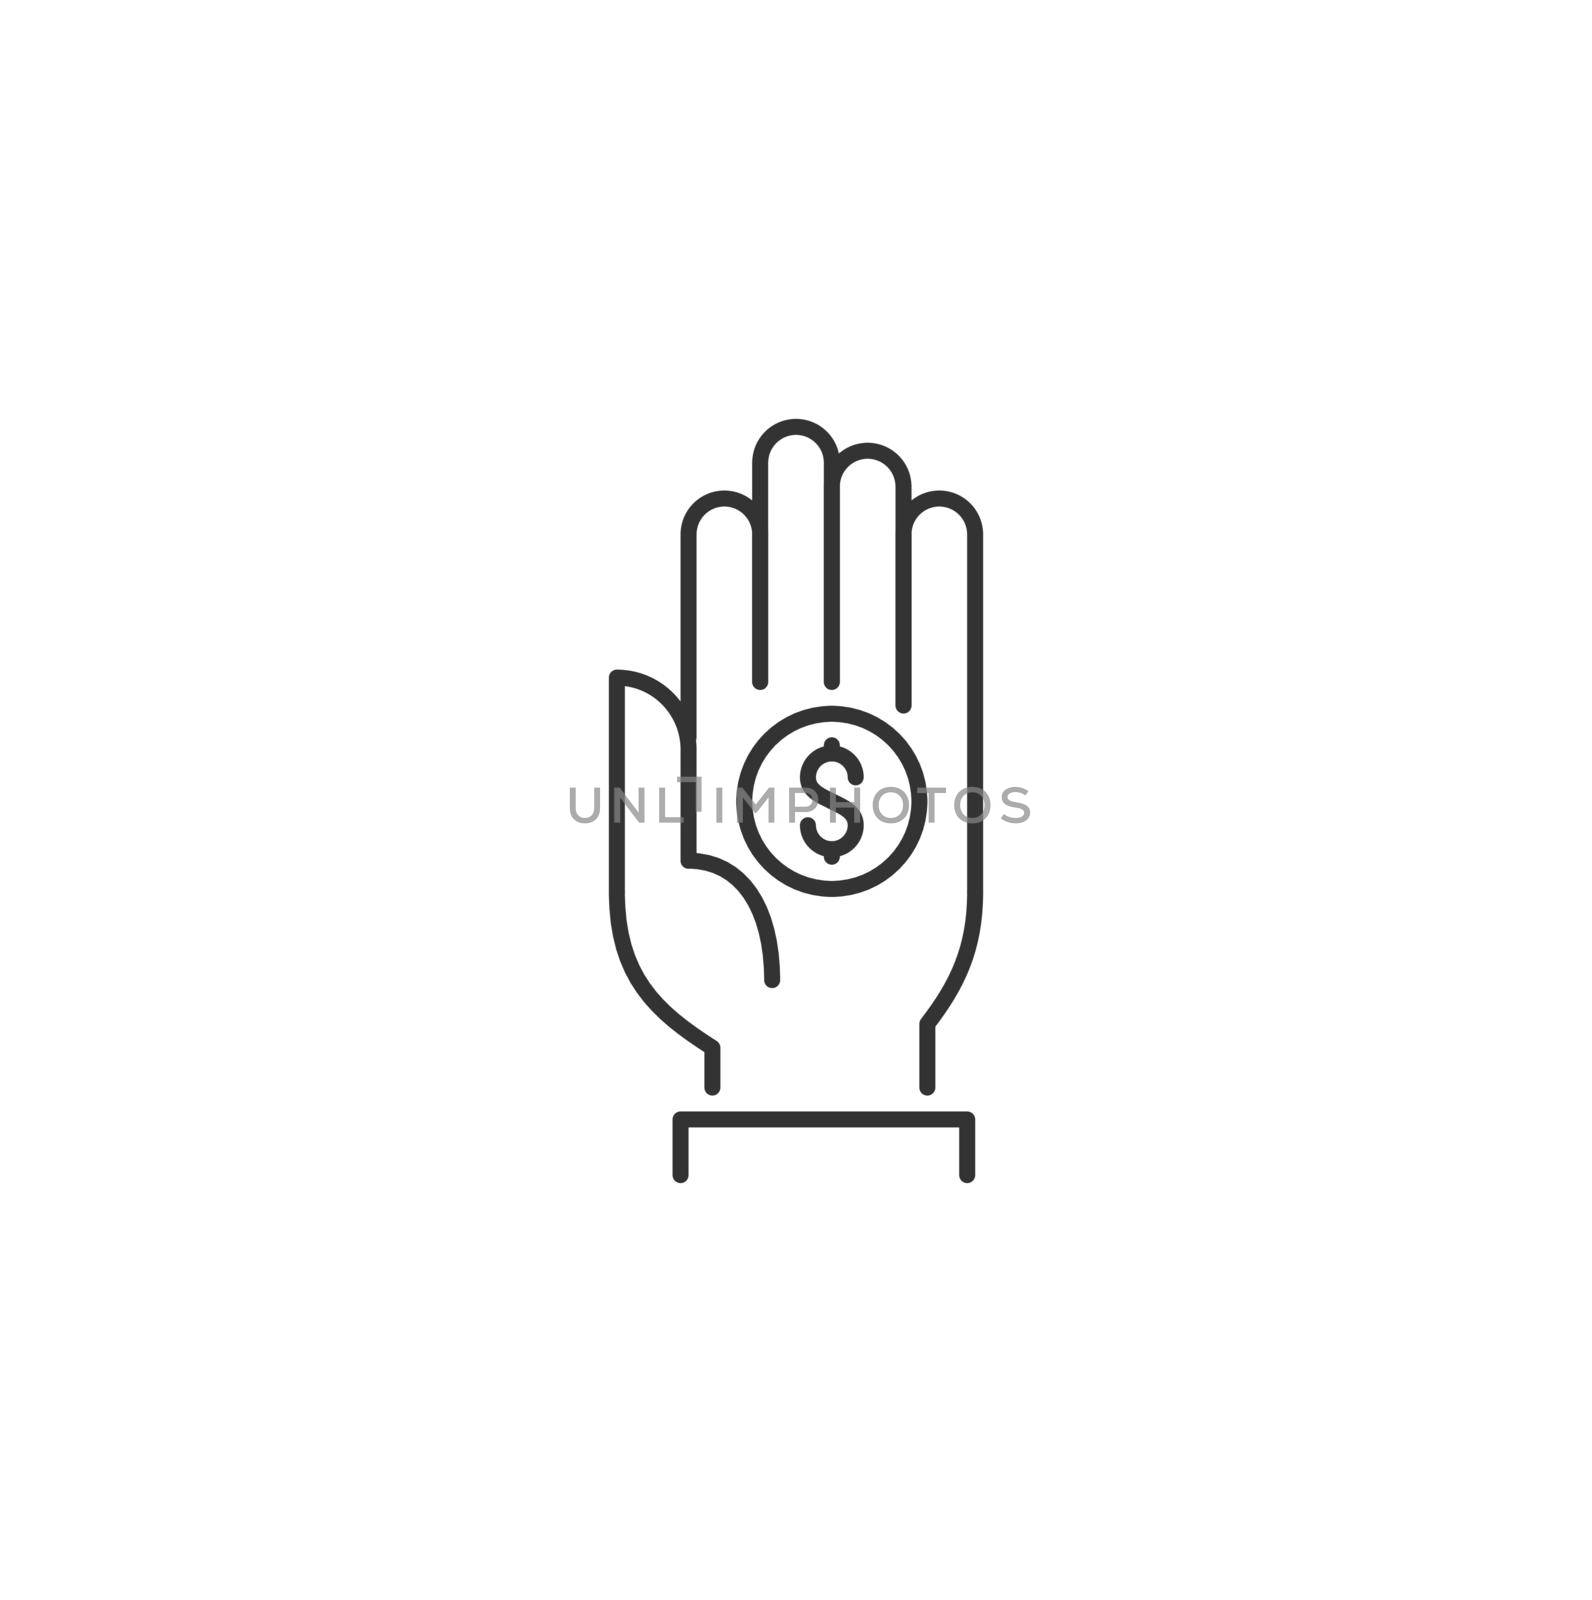 Coin in Palm Related Vector Line Icon. Sign Isolated on the White Background. Editable Stroke EPS file. Vector illustration.